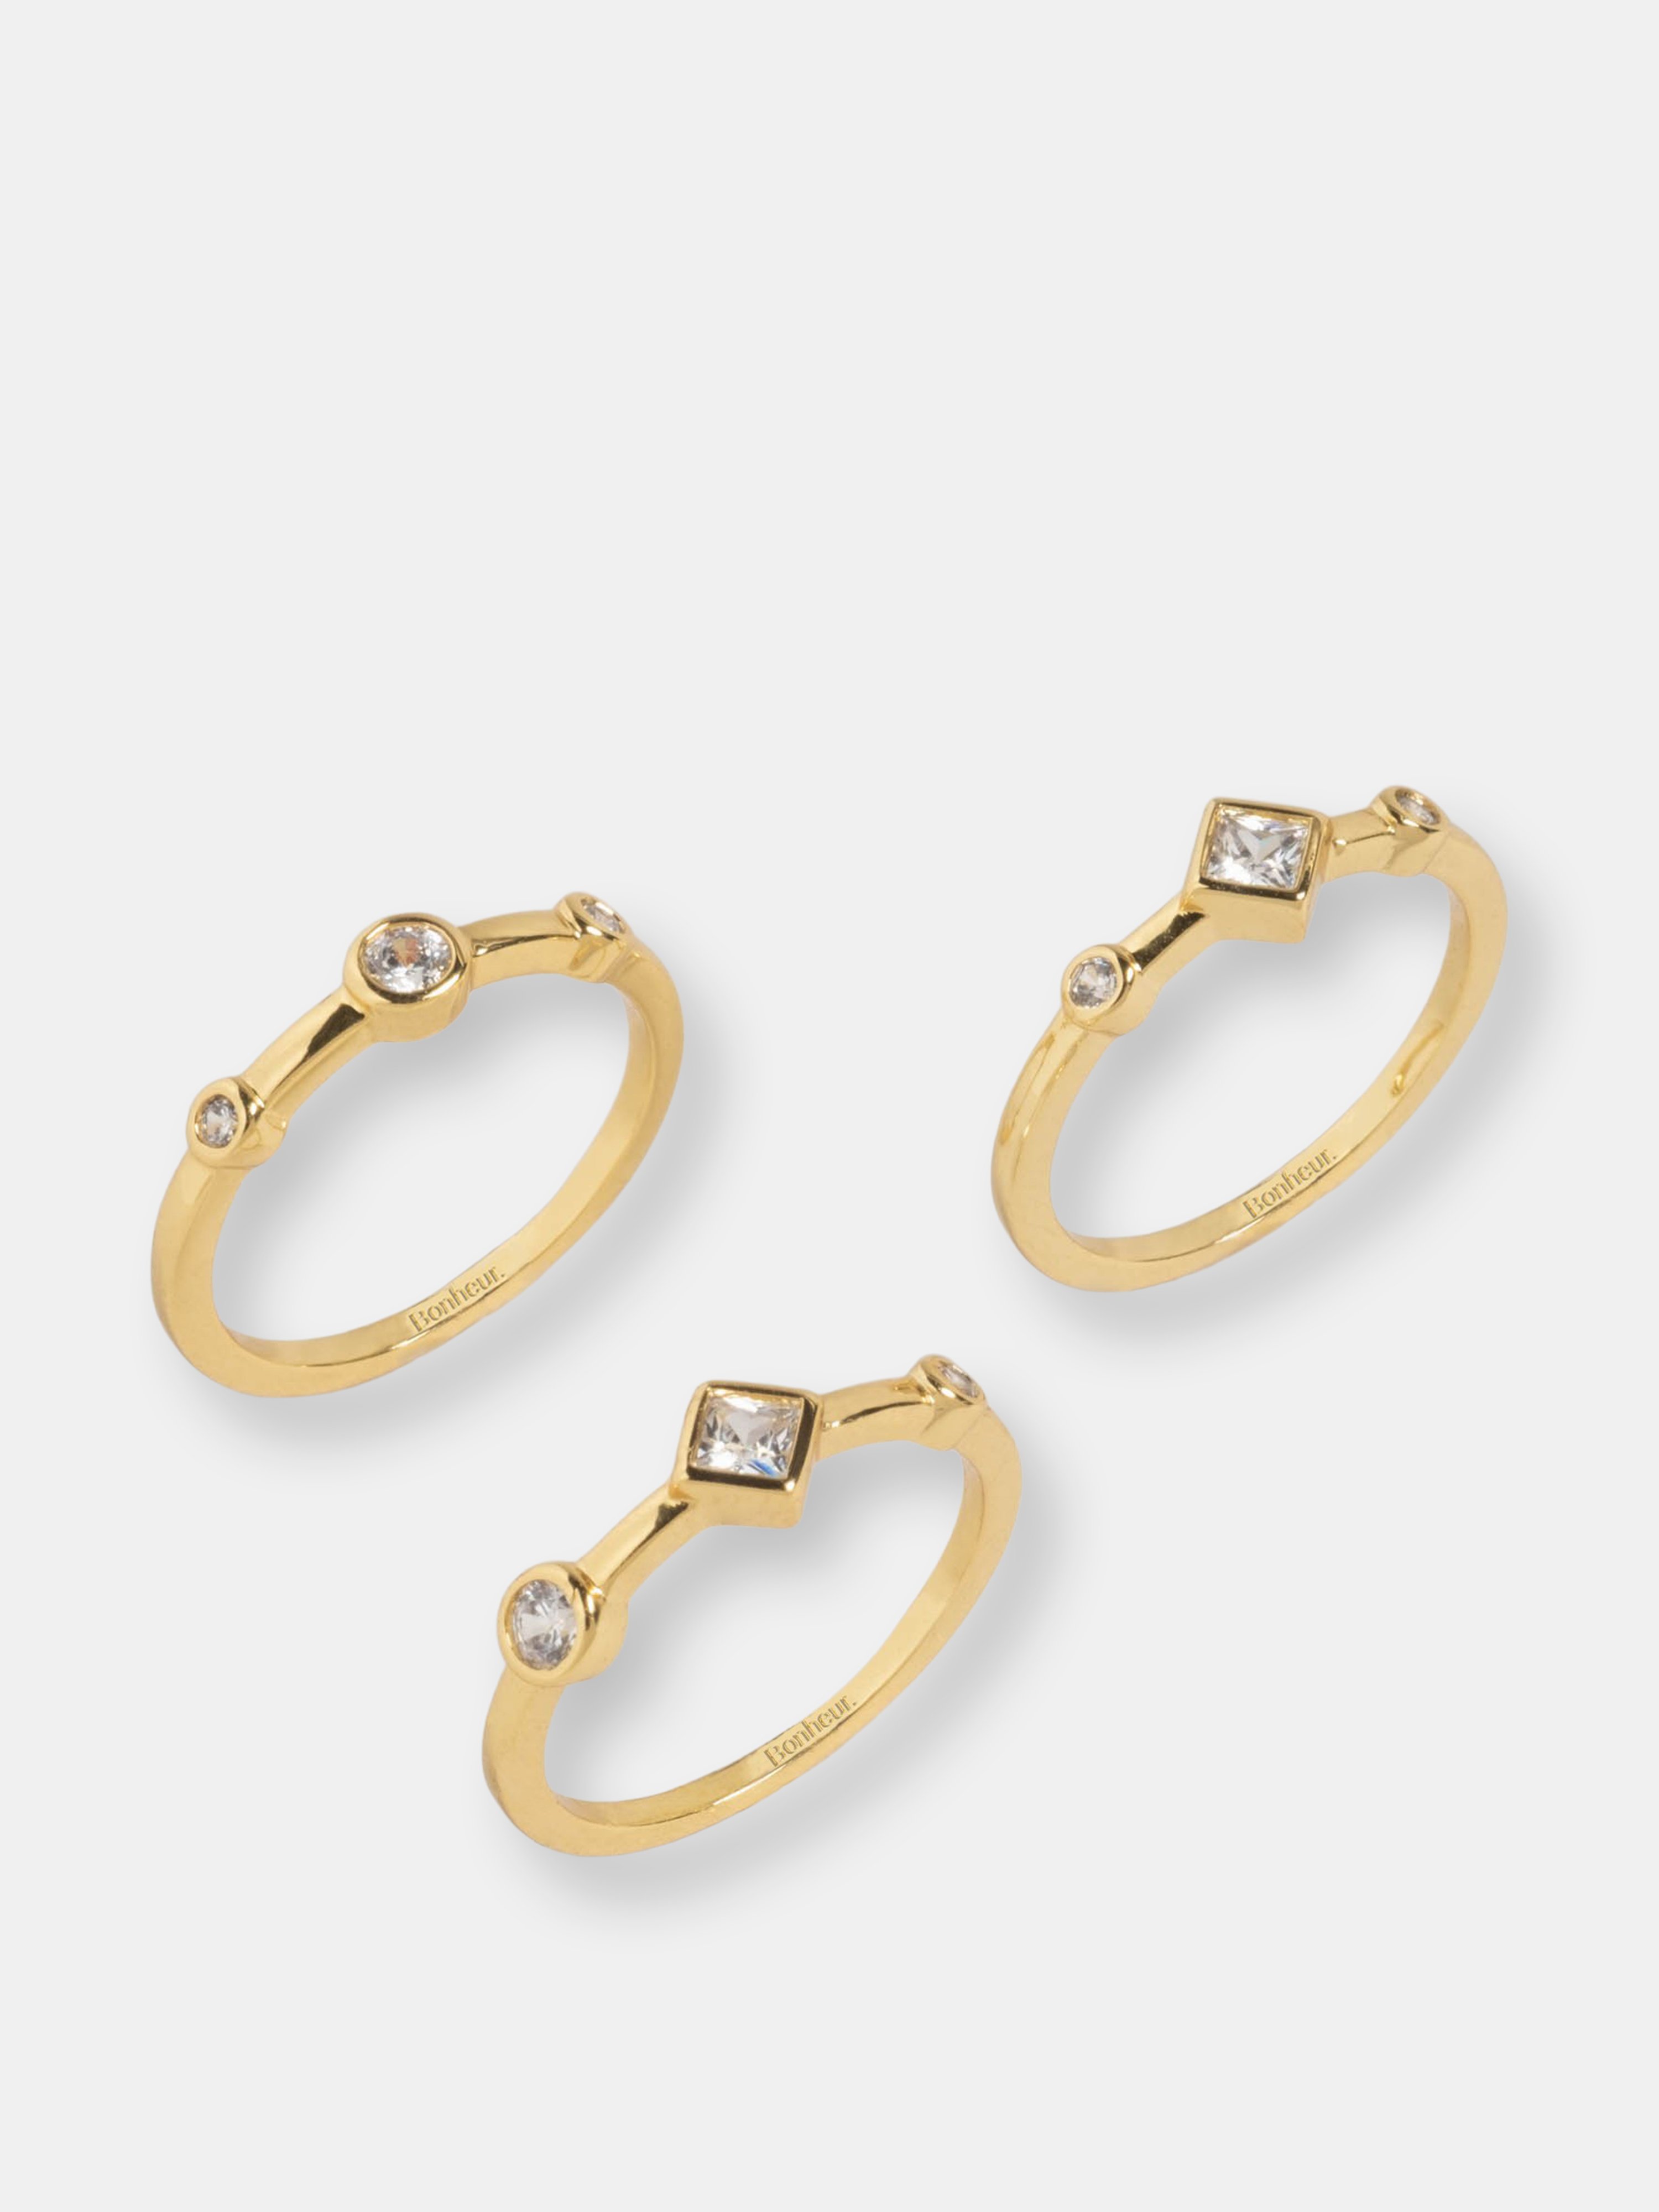 BONHEUR JEWELRY BONHEUR JEWELRY LOUISE STACKABLE GOLD RING SET